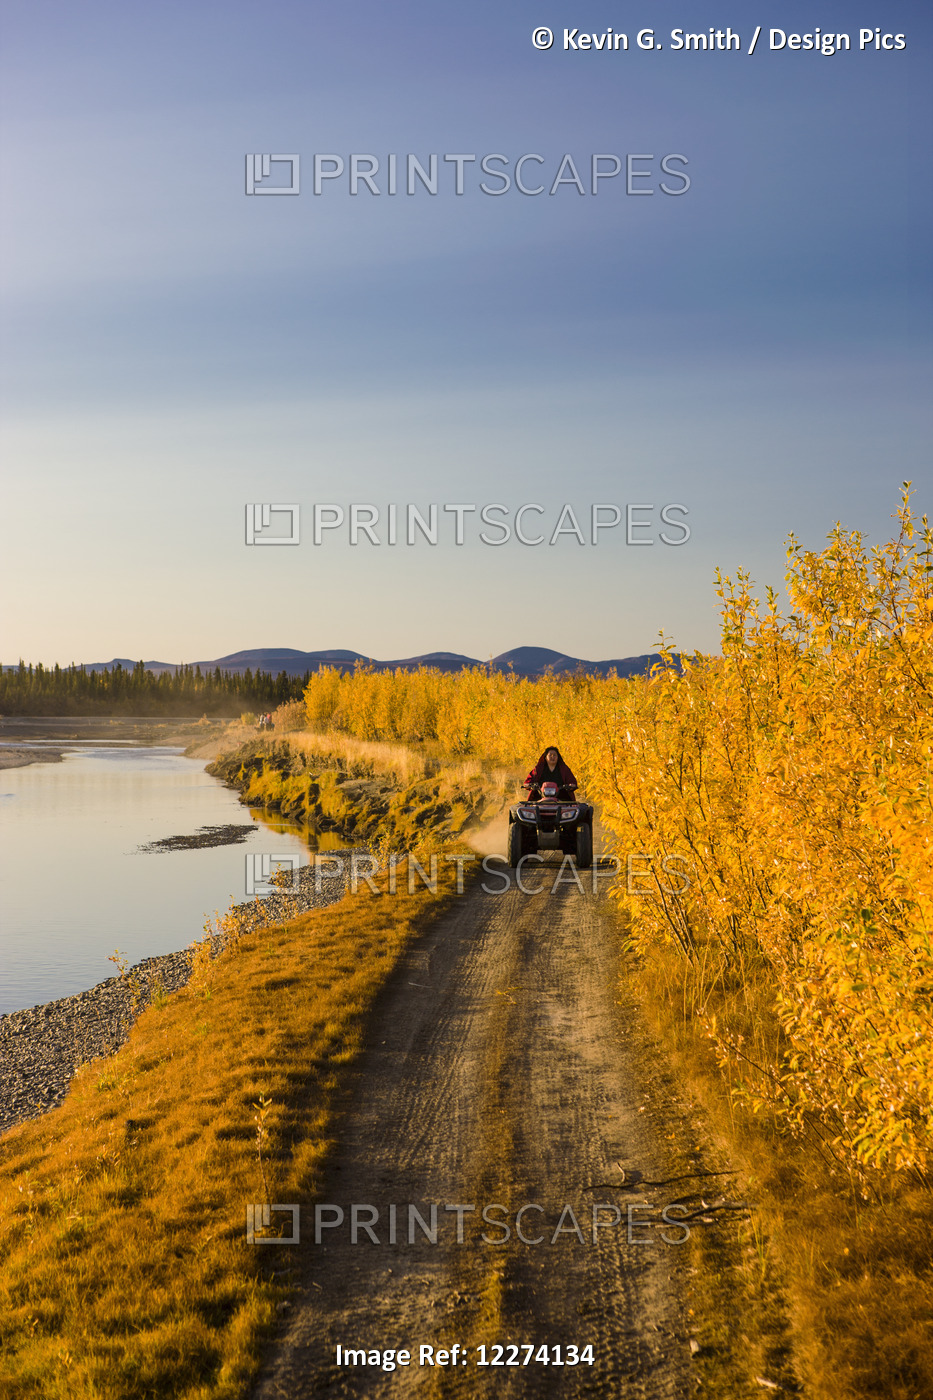 A Native Alaskan Woman Drives An Atv On A Colorful Tree Lined Trail Along The ...